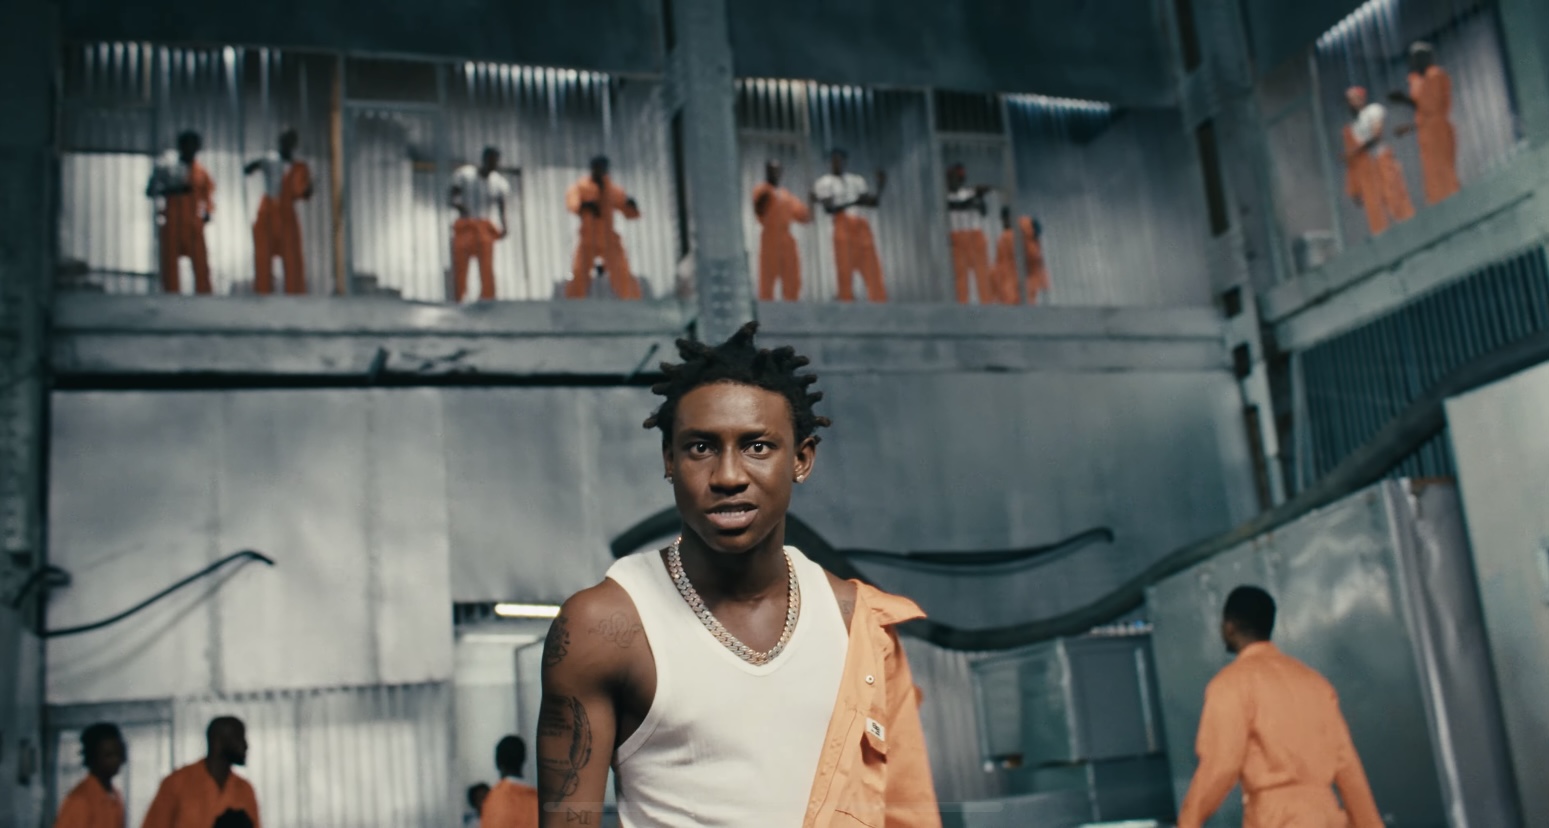 Shallipopi's “Ex Convict” Comes to Life in Striking Visuals